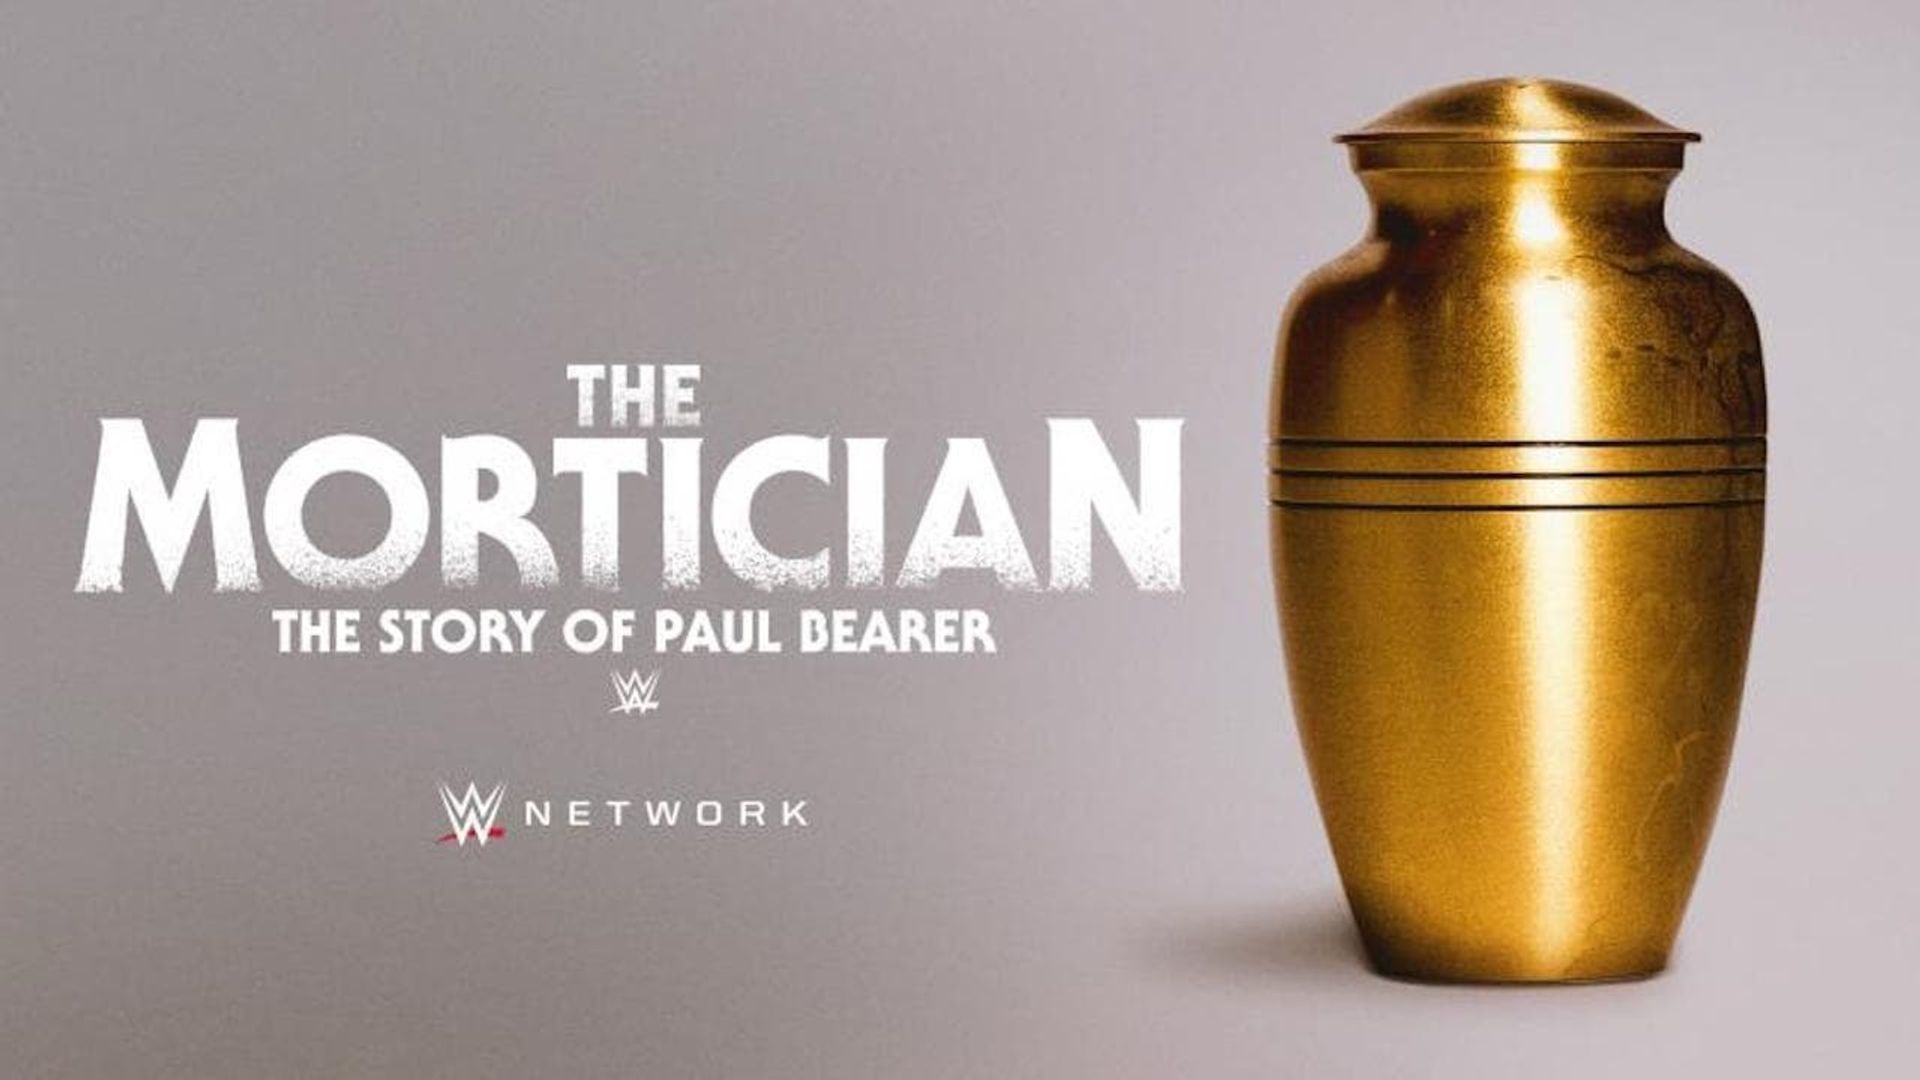 The Mortician: The Story of Paul Bearer background